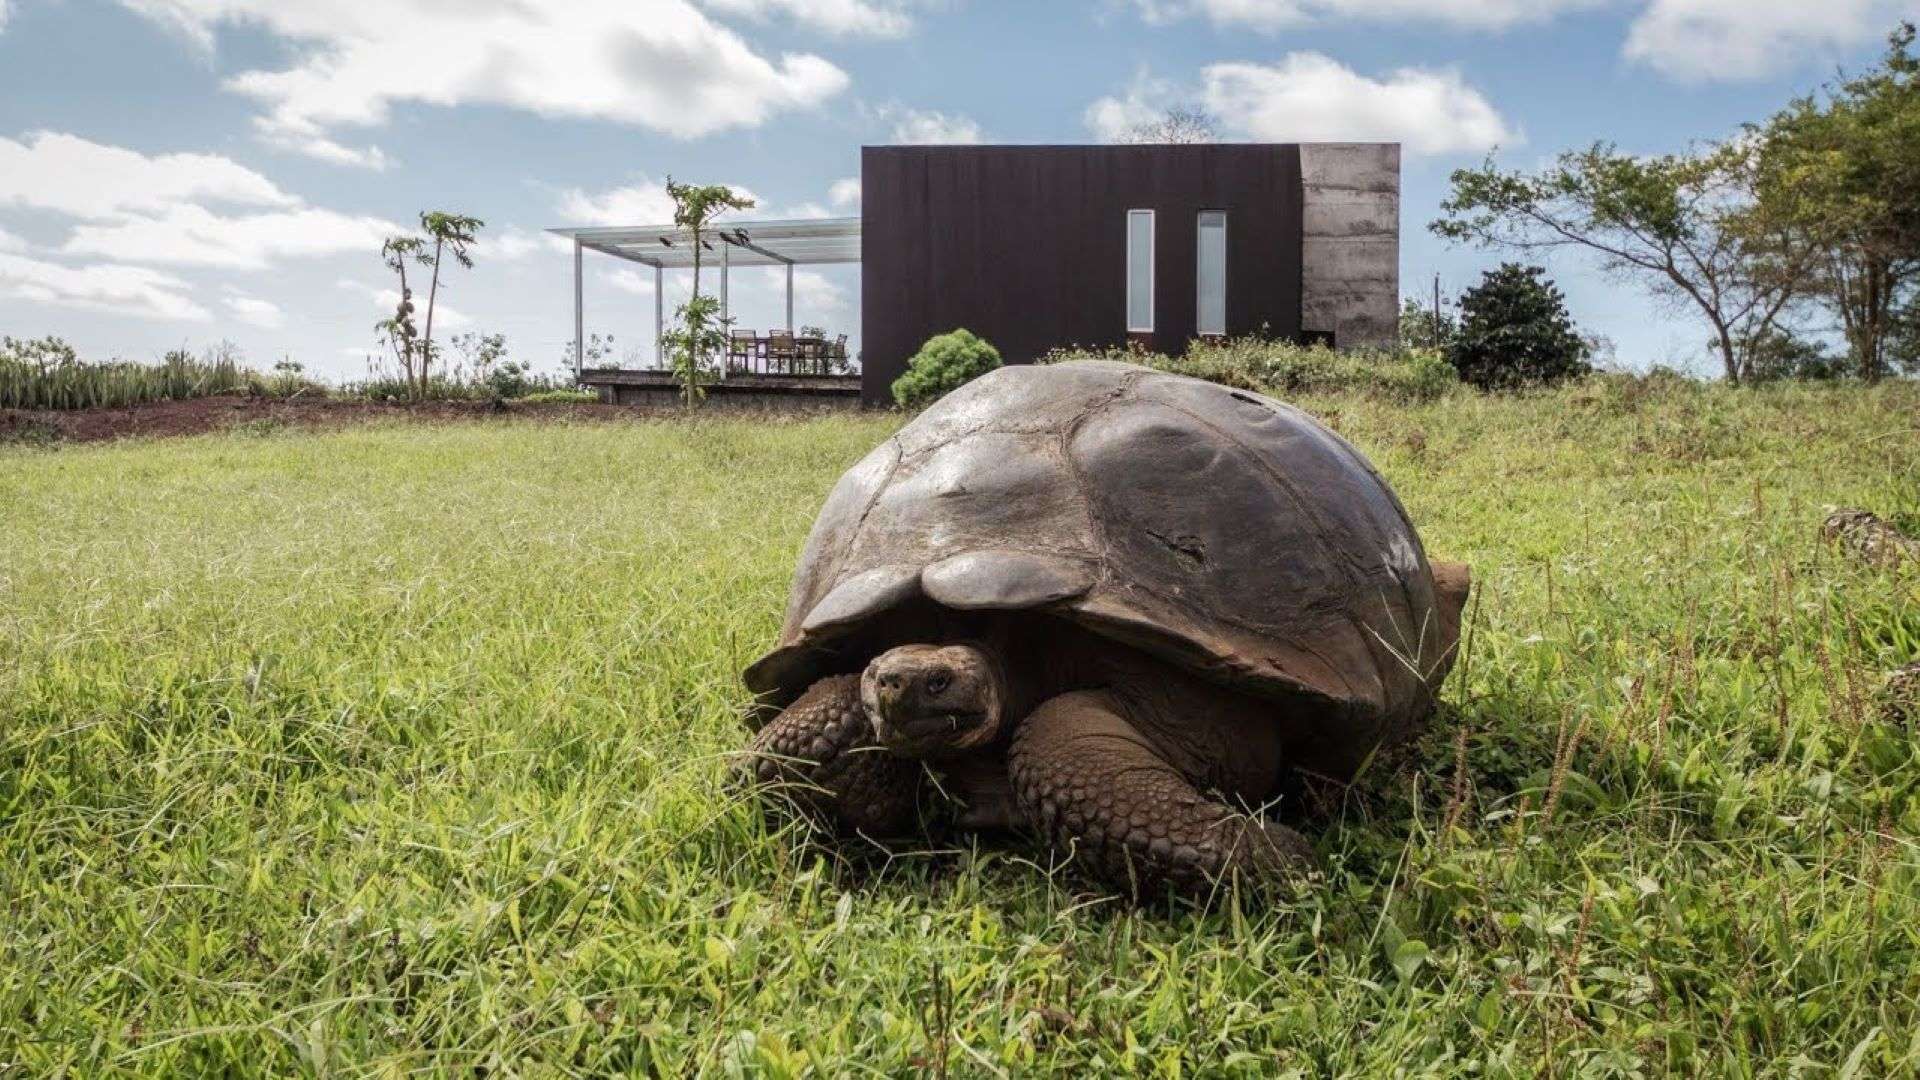 A tortoise roams the grounds at Montemar coffee farm in the Galapagos